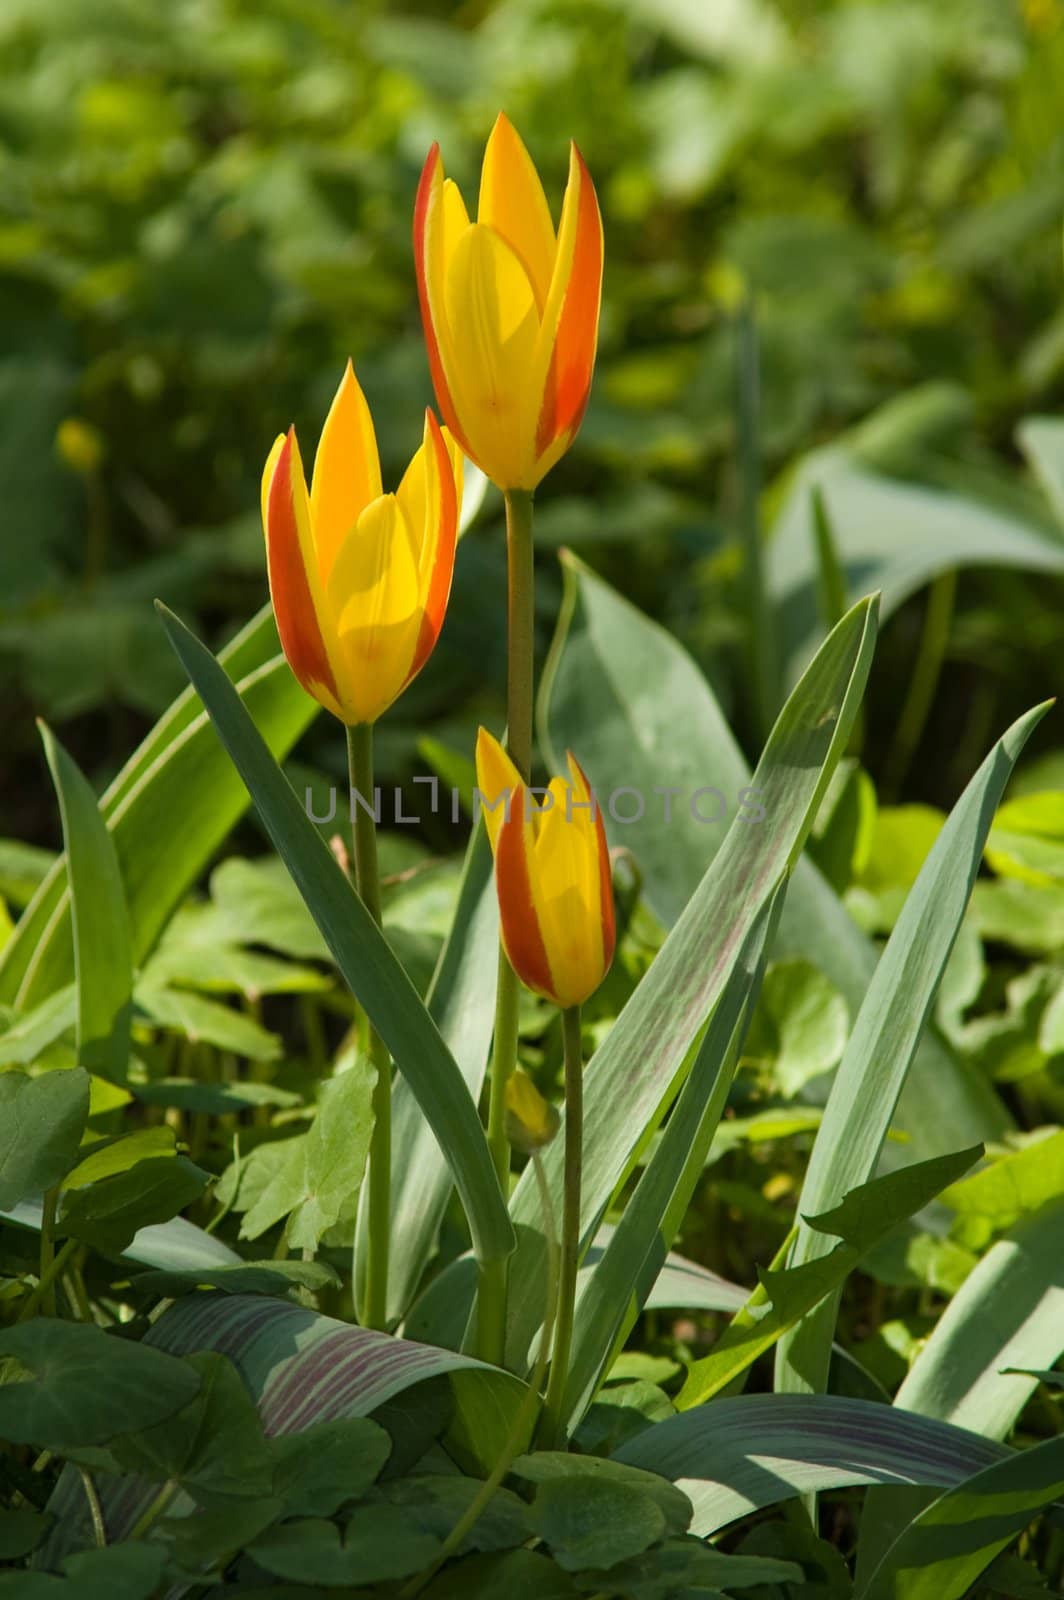 Striped yellow and red tulip by lilsla